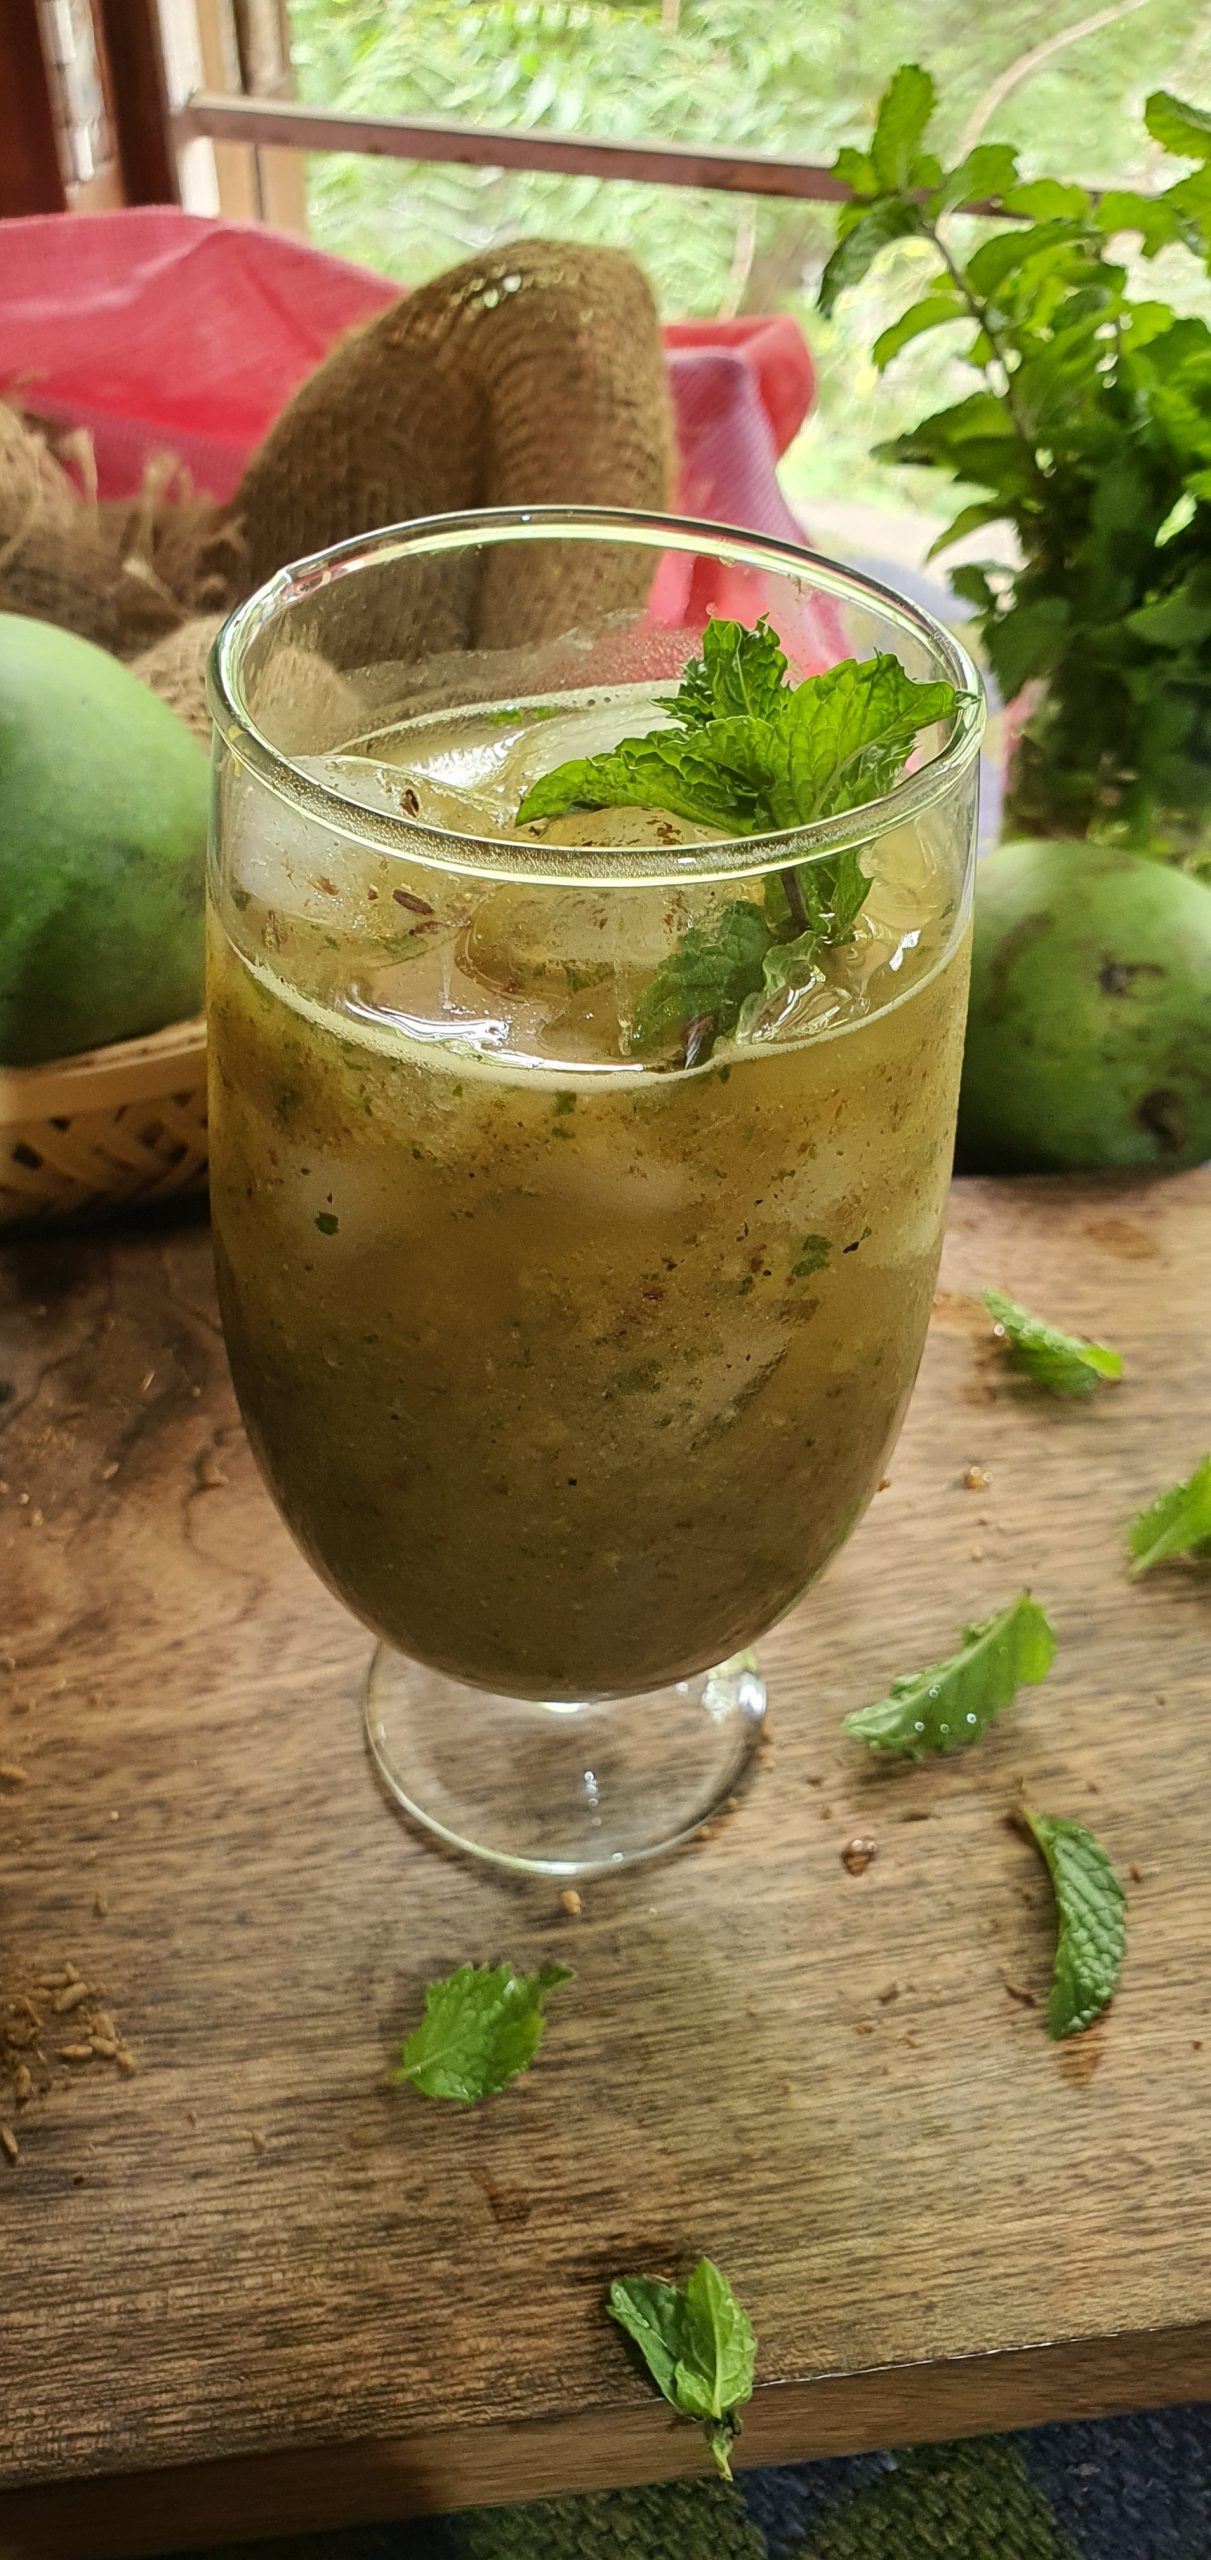 Aam Panna/Green Mango Sweet and Sour Drink